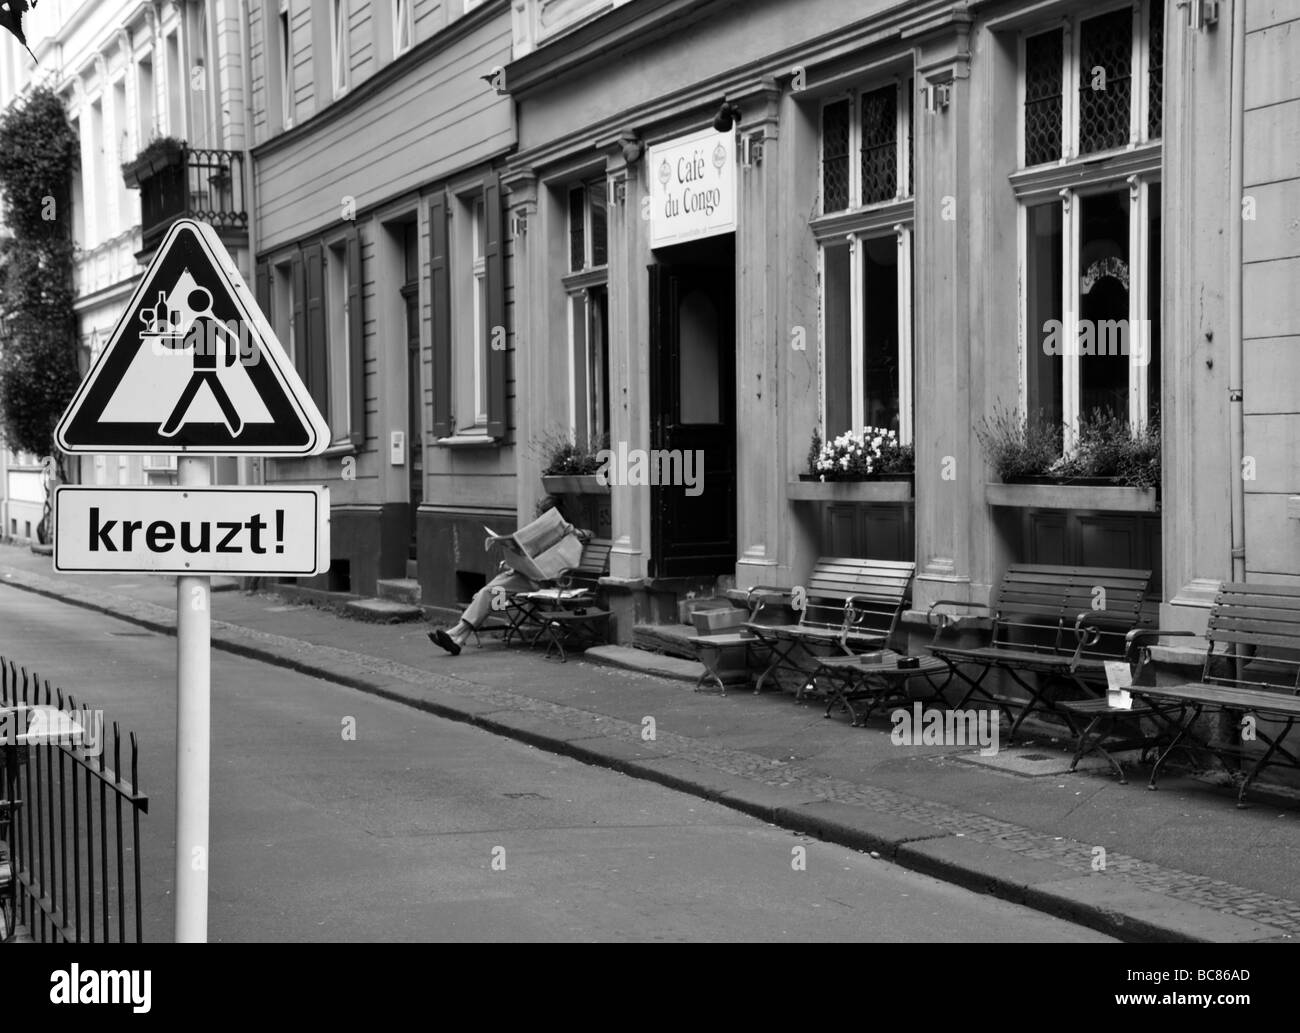 Warning Waiter Crossing A cafe in Luisenstrasse Wuppertal Germany Stock Photo